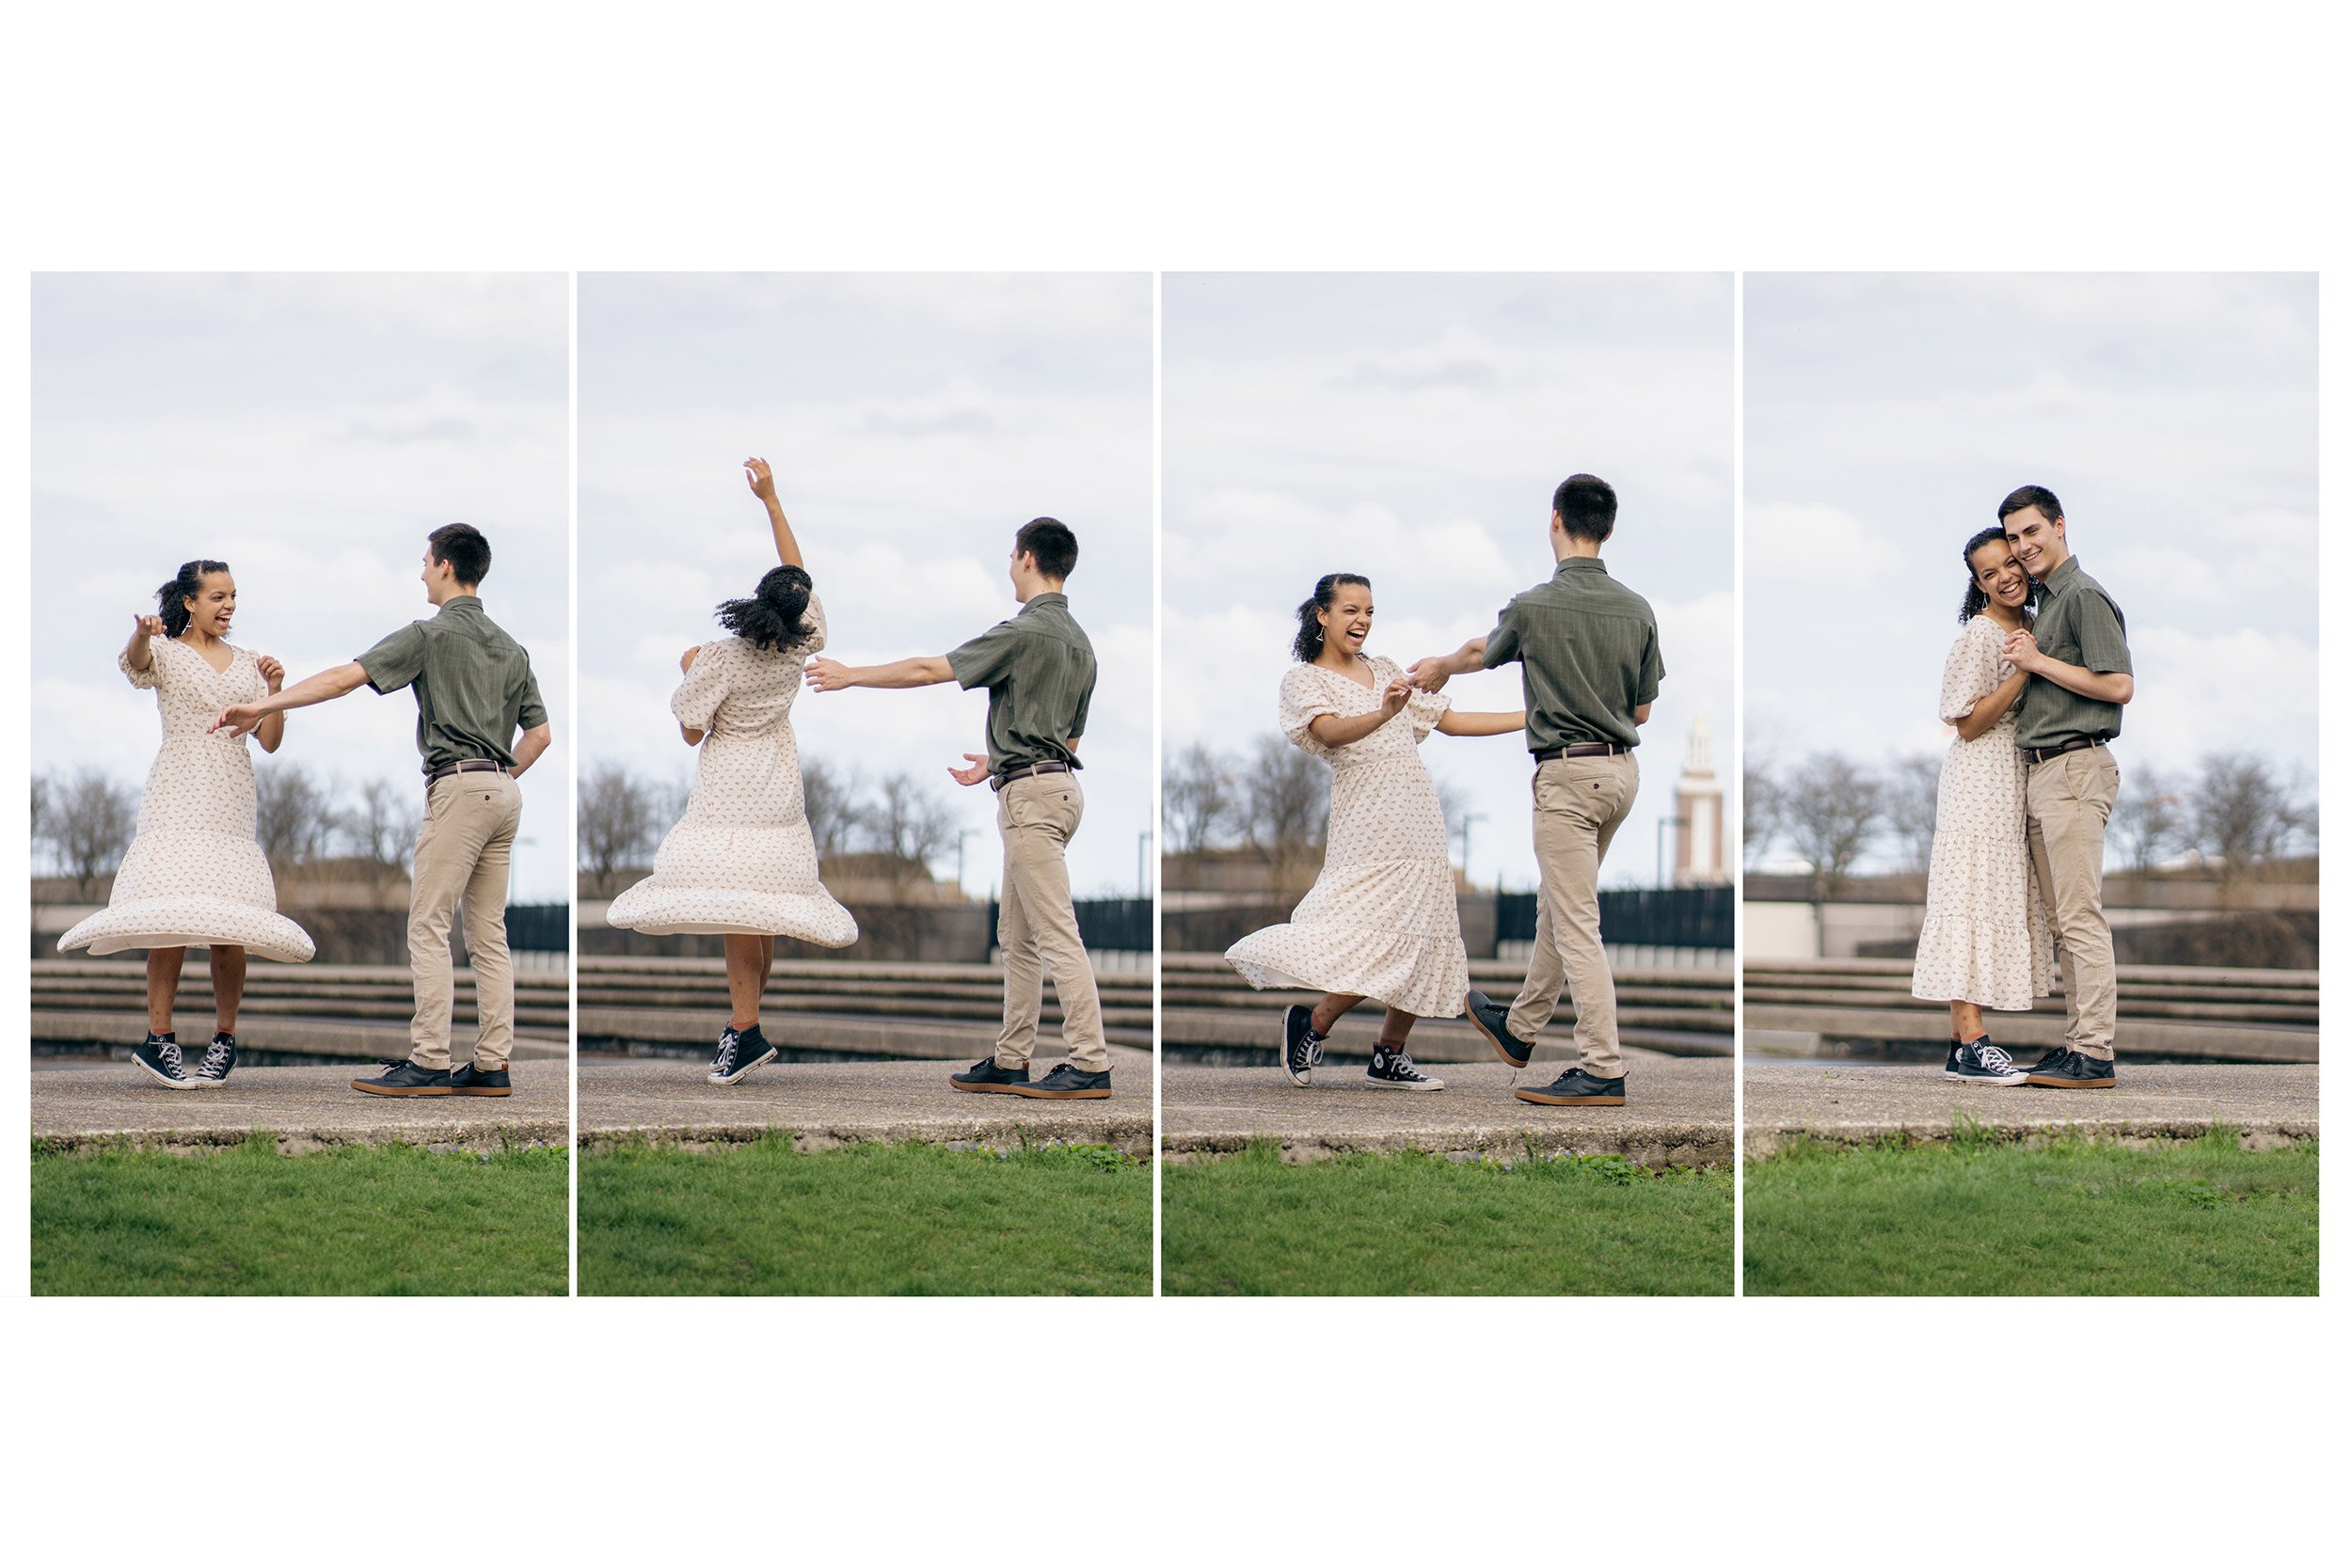 _J-A-eSession-Dancing-Sequence-2-WEB.jpg